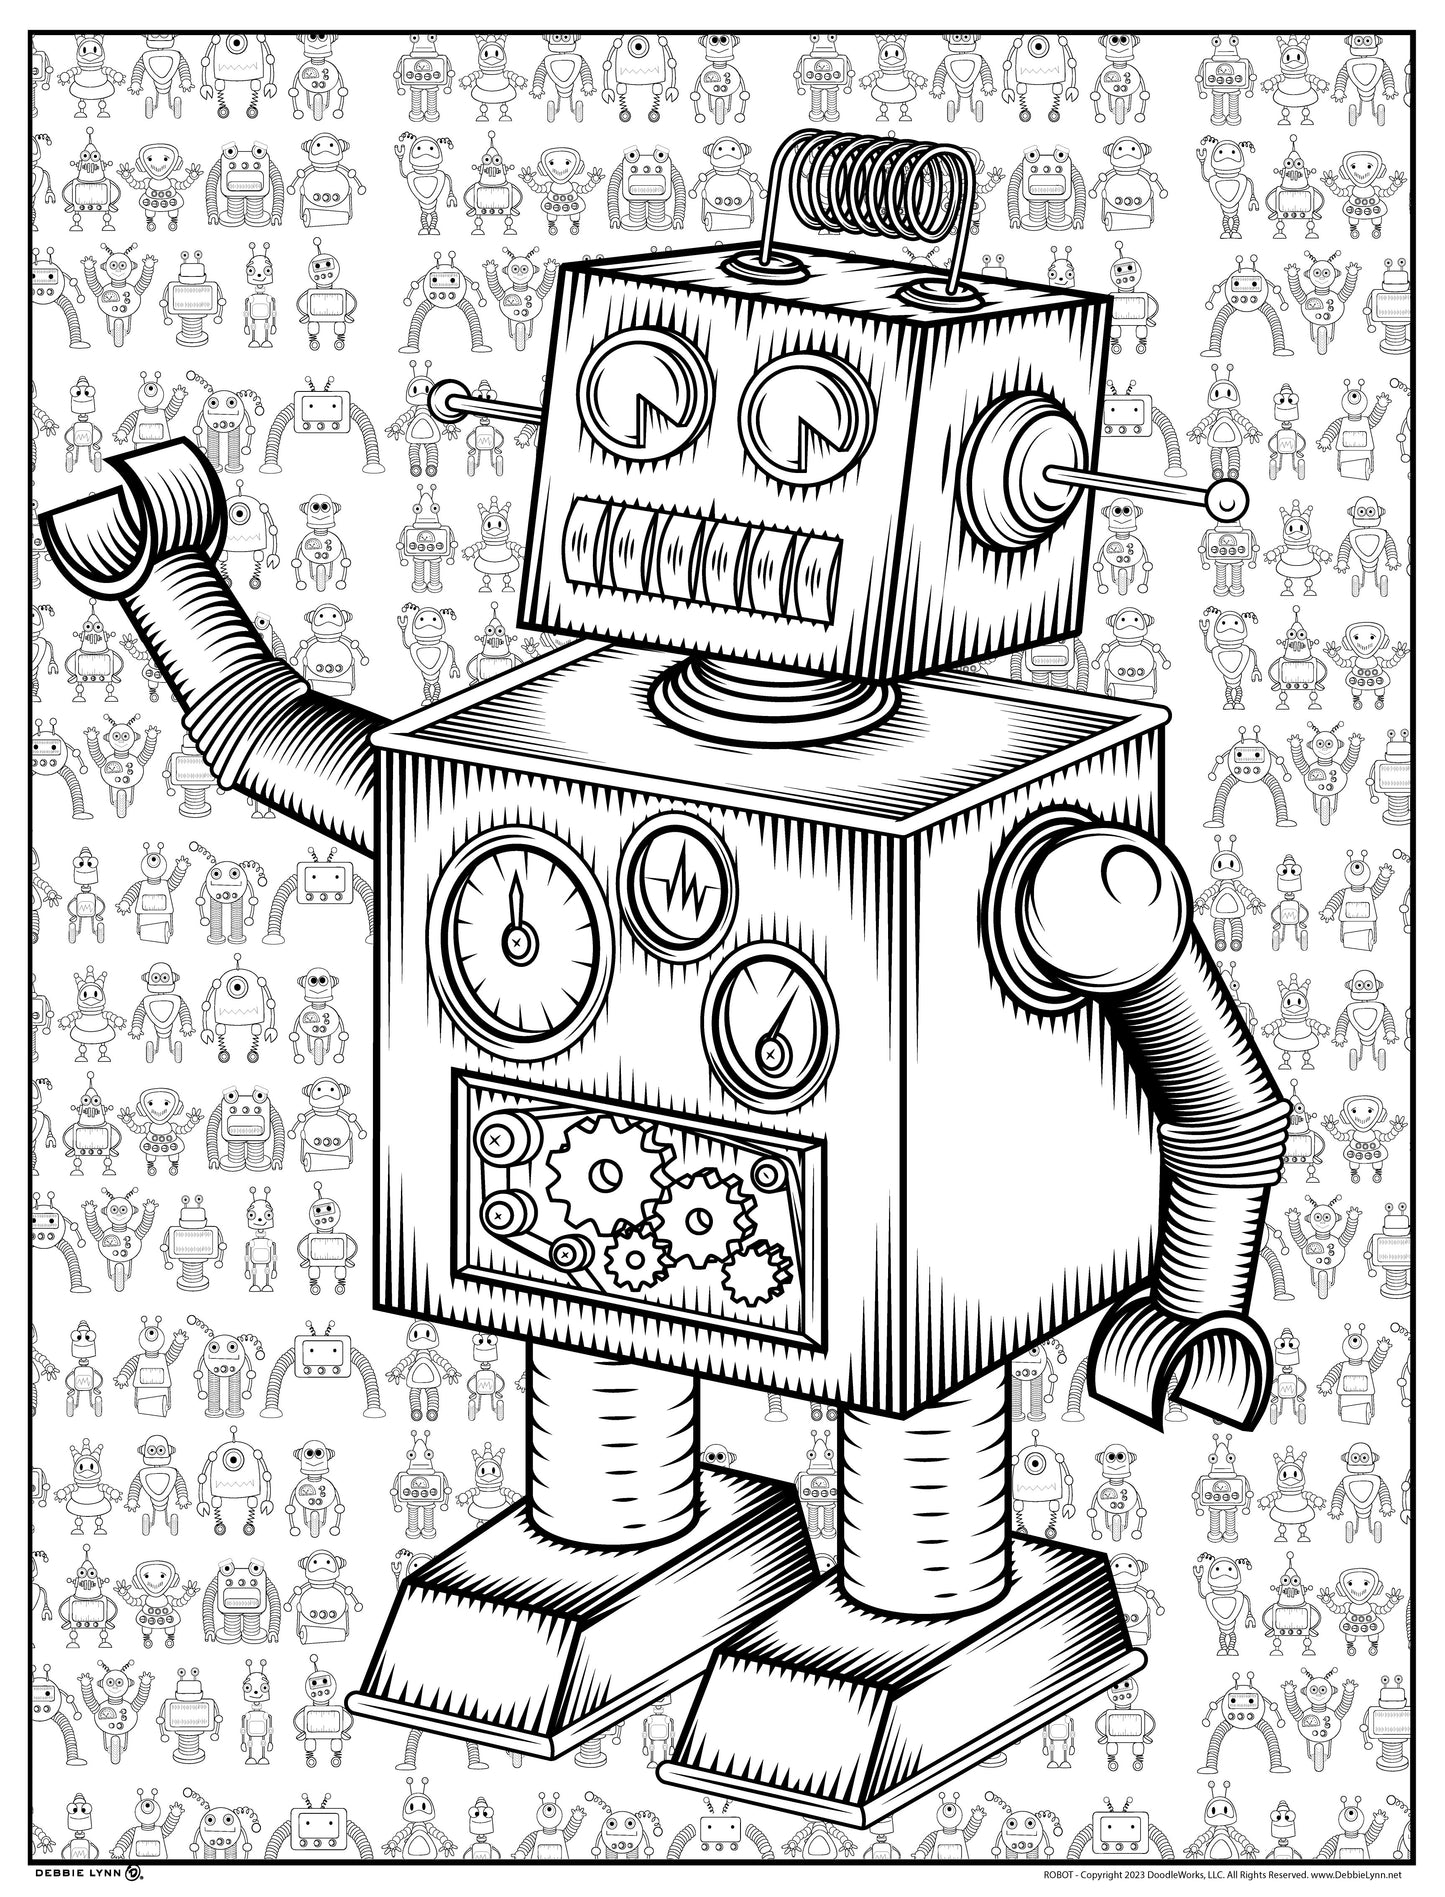 Robot Personalized Giant Coloring Poster 46"x60"